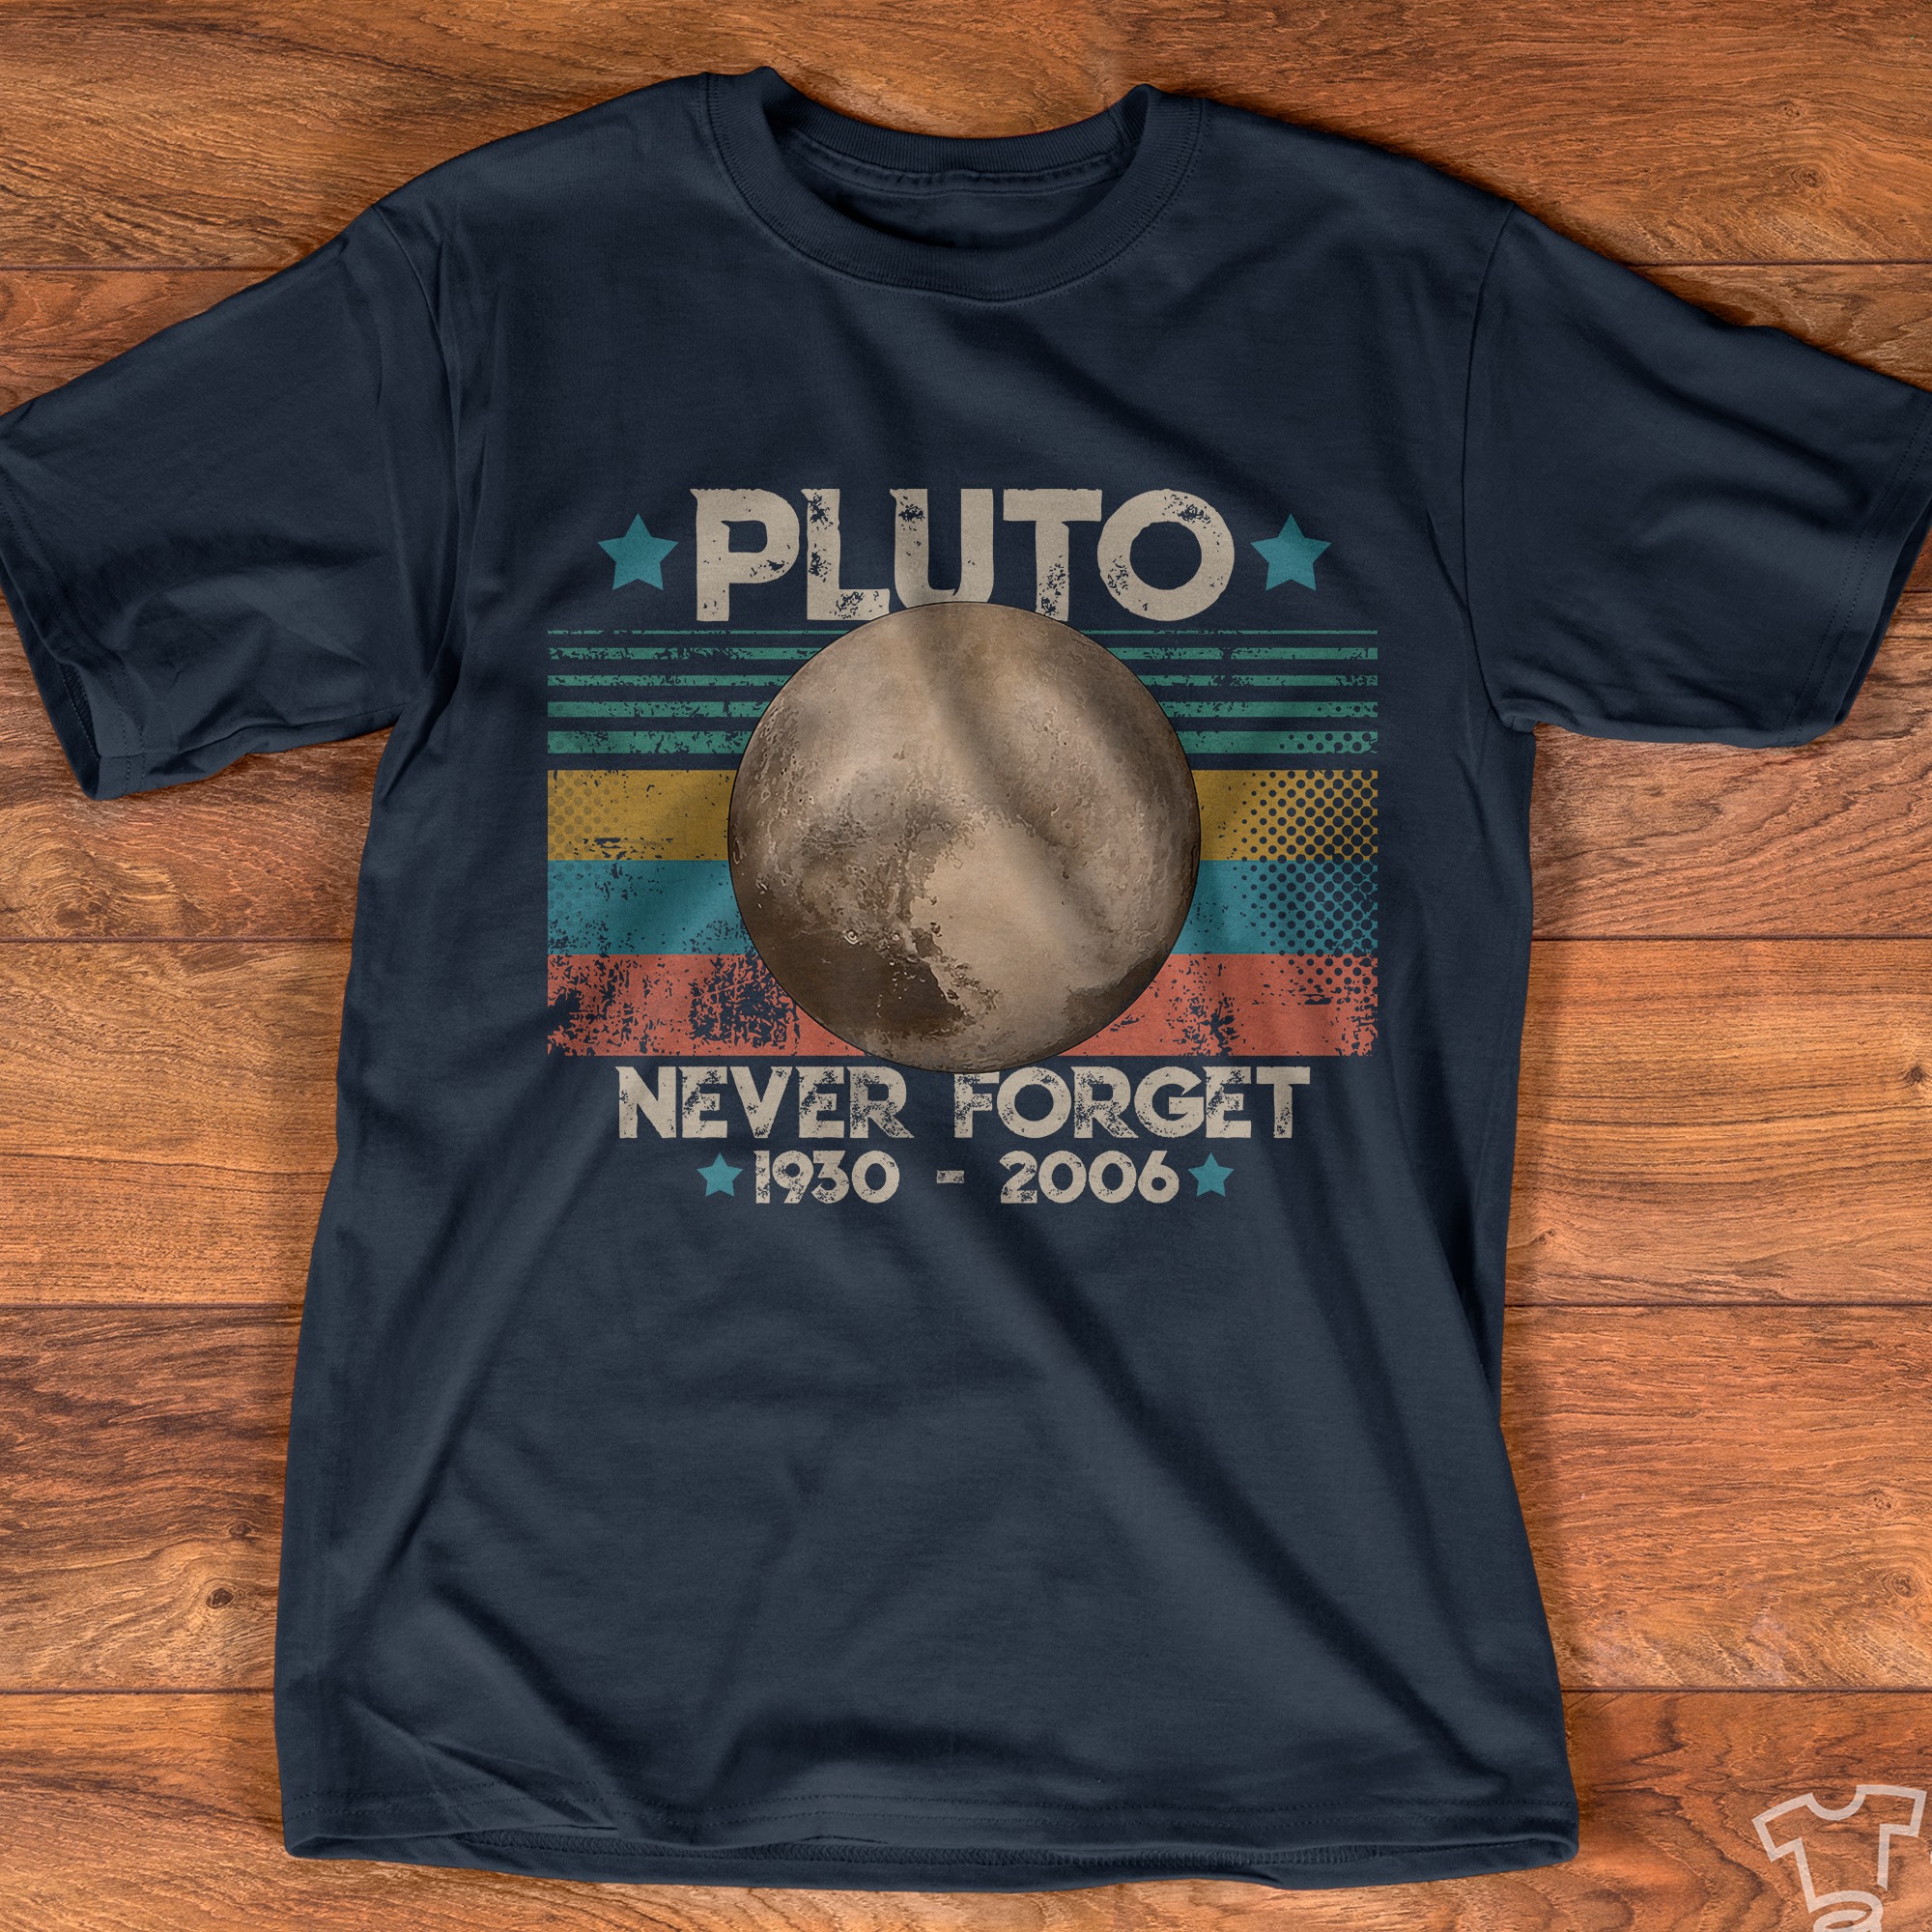 Pluto never forget 1930 - 2006